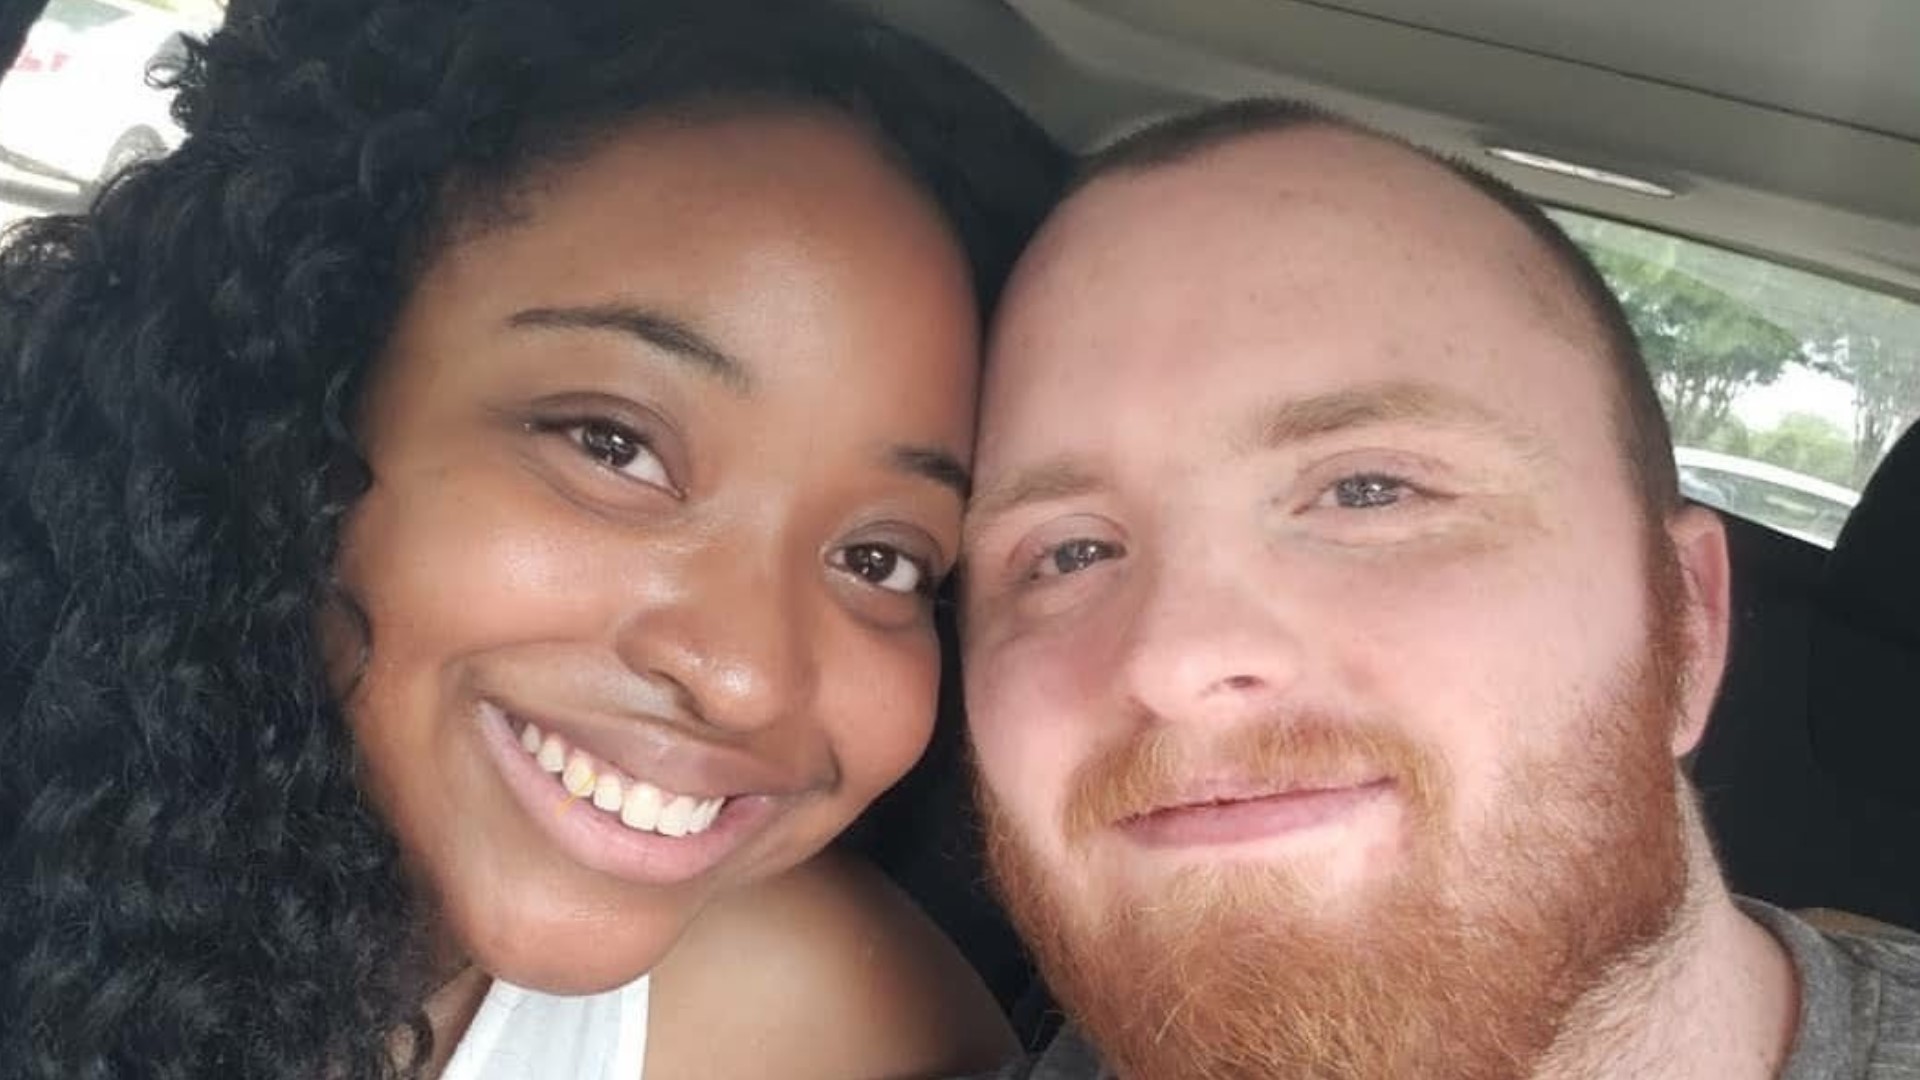 Garrett Foster was 28 years old when he was shot and killed Saturday. He and his fiancée are both originally from North Texas.